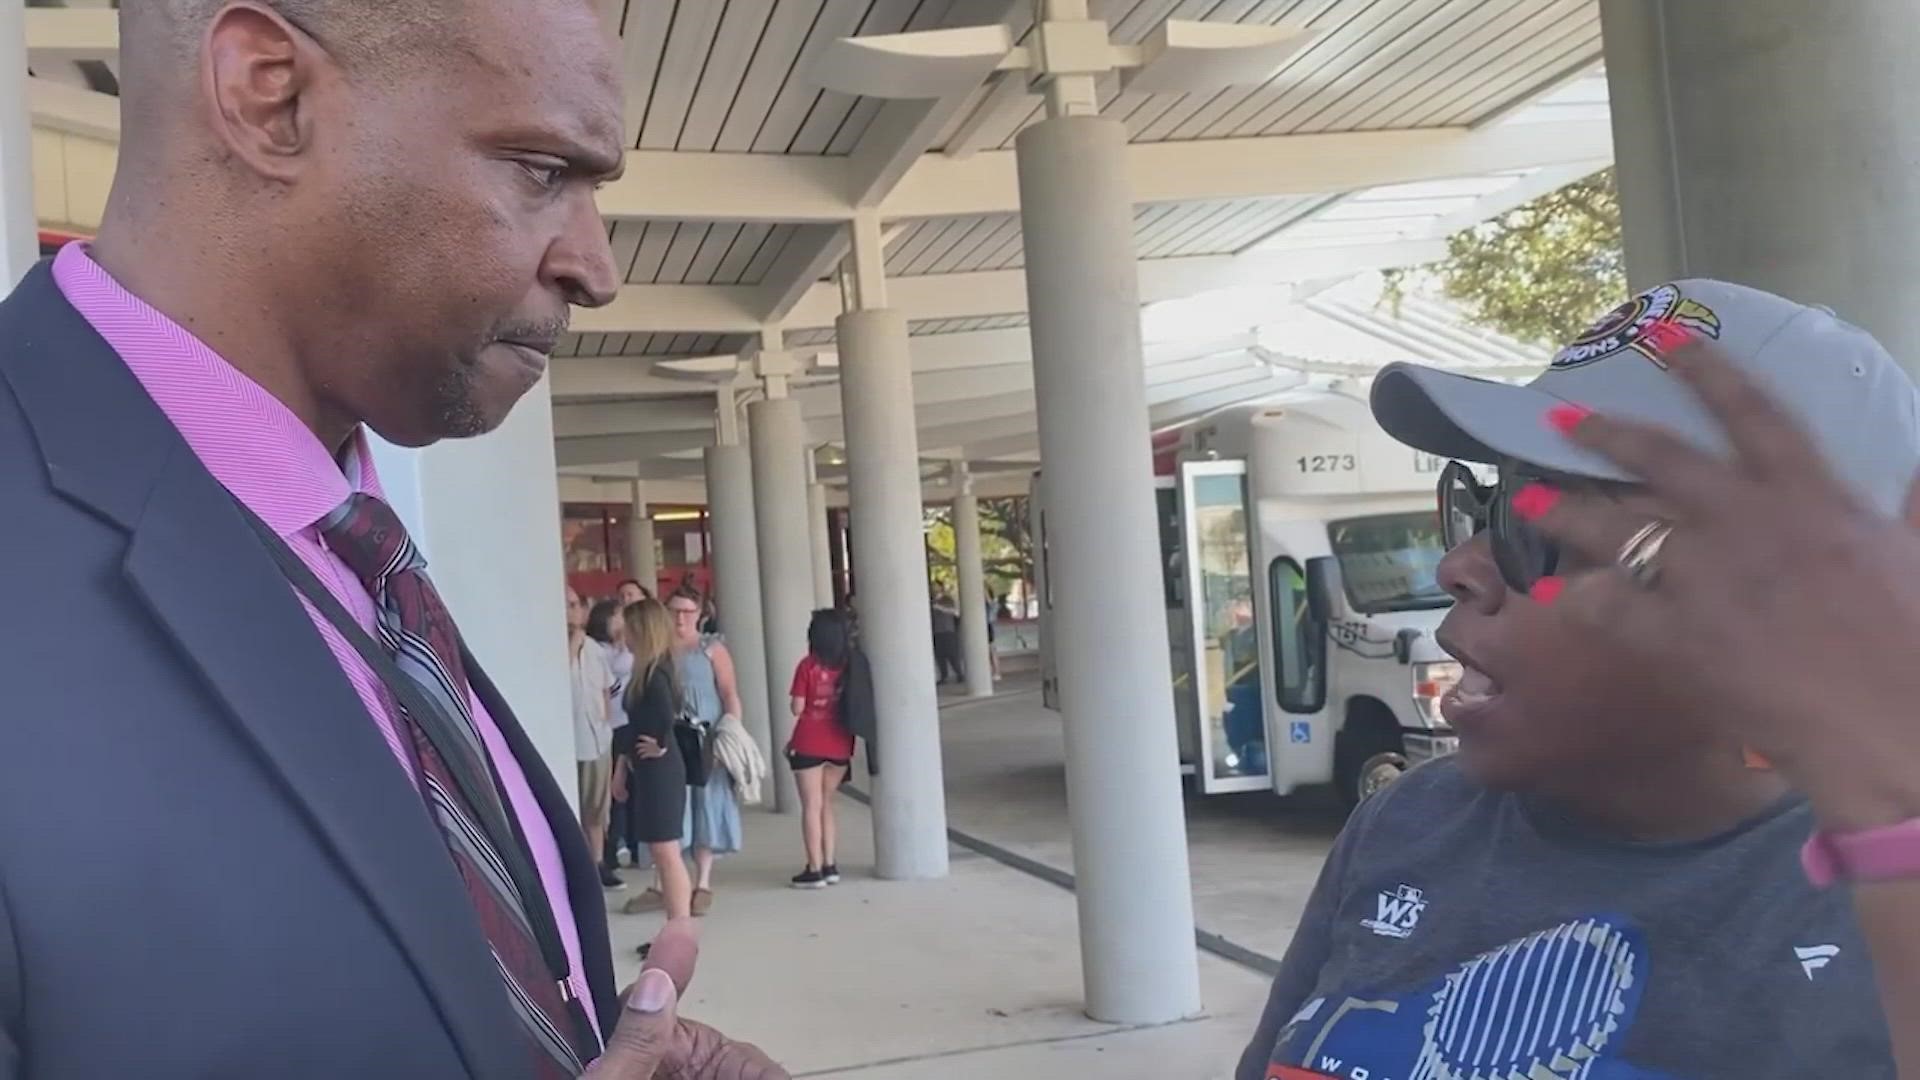 Harris County Election Administrator Clifford Tatum said election workers are at every location in the county after being confronted over delays county-wide.